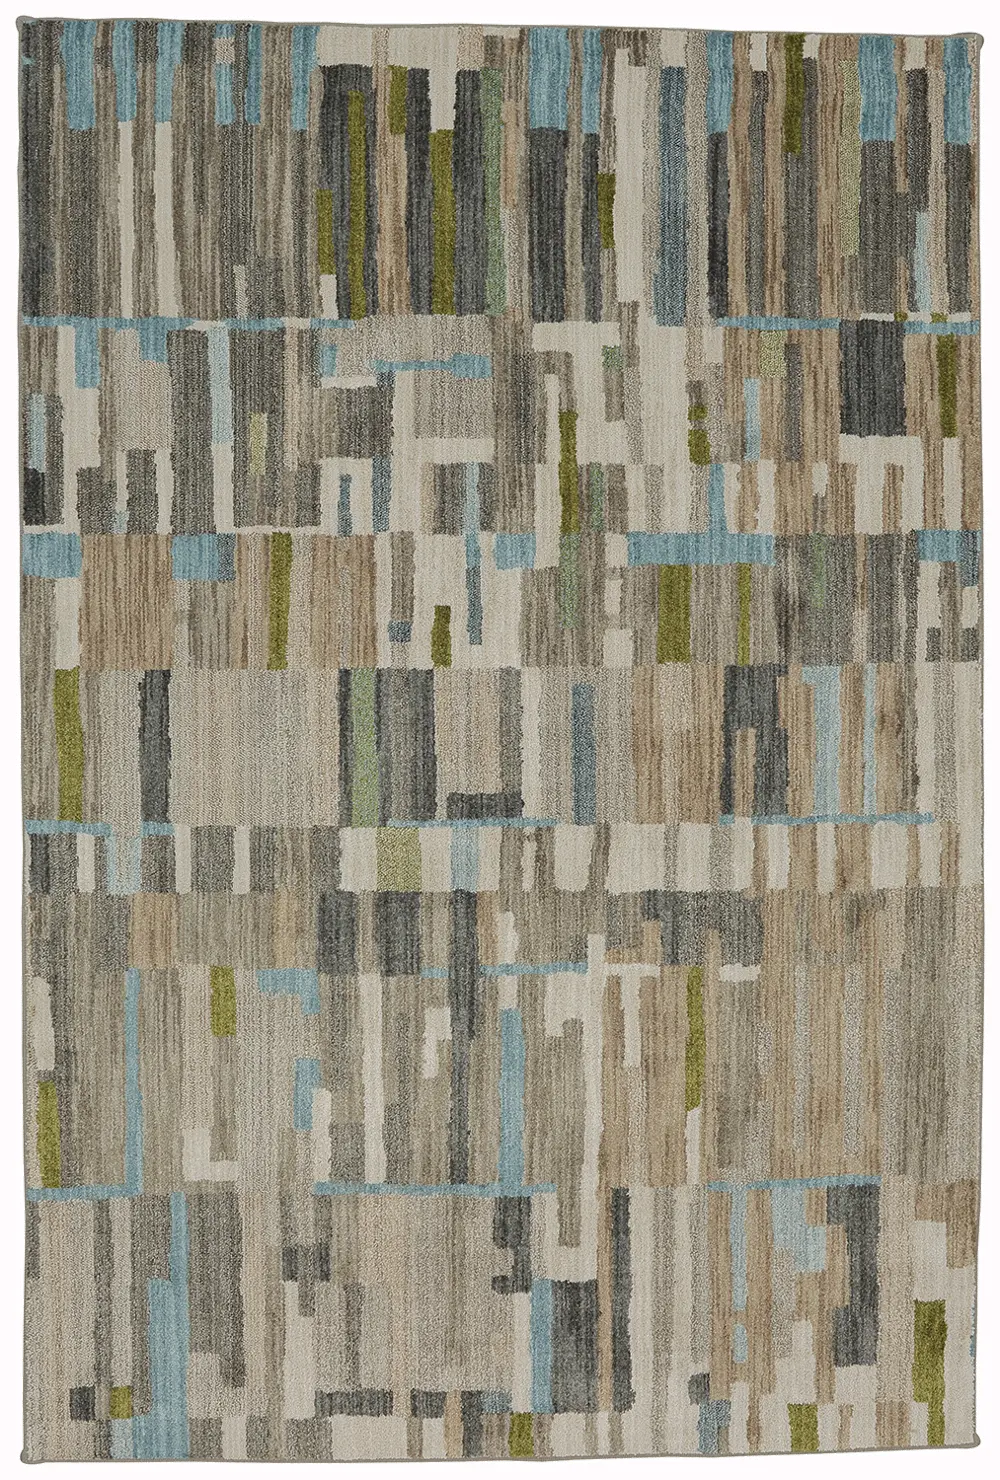 91017-50137/5X8/MUSE 5 x 8 Medium Brown, Gray, Green, and Blue Rug - Muse-1